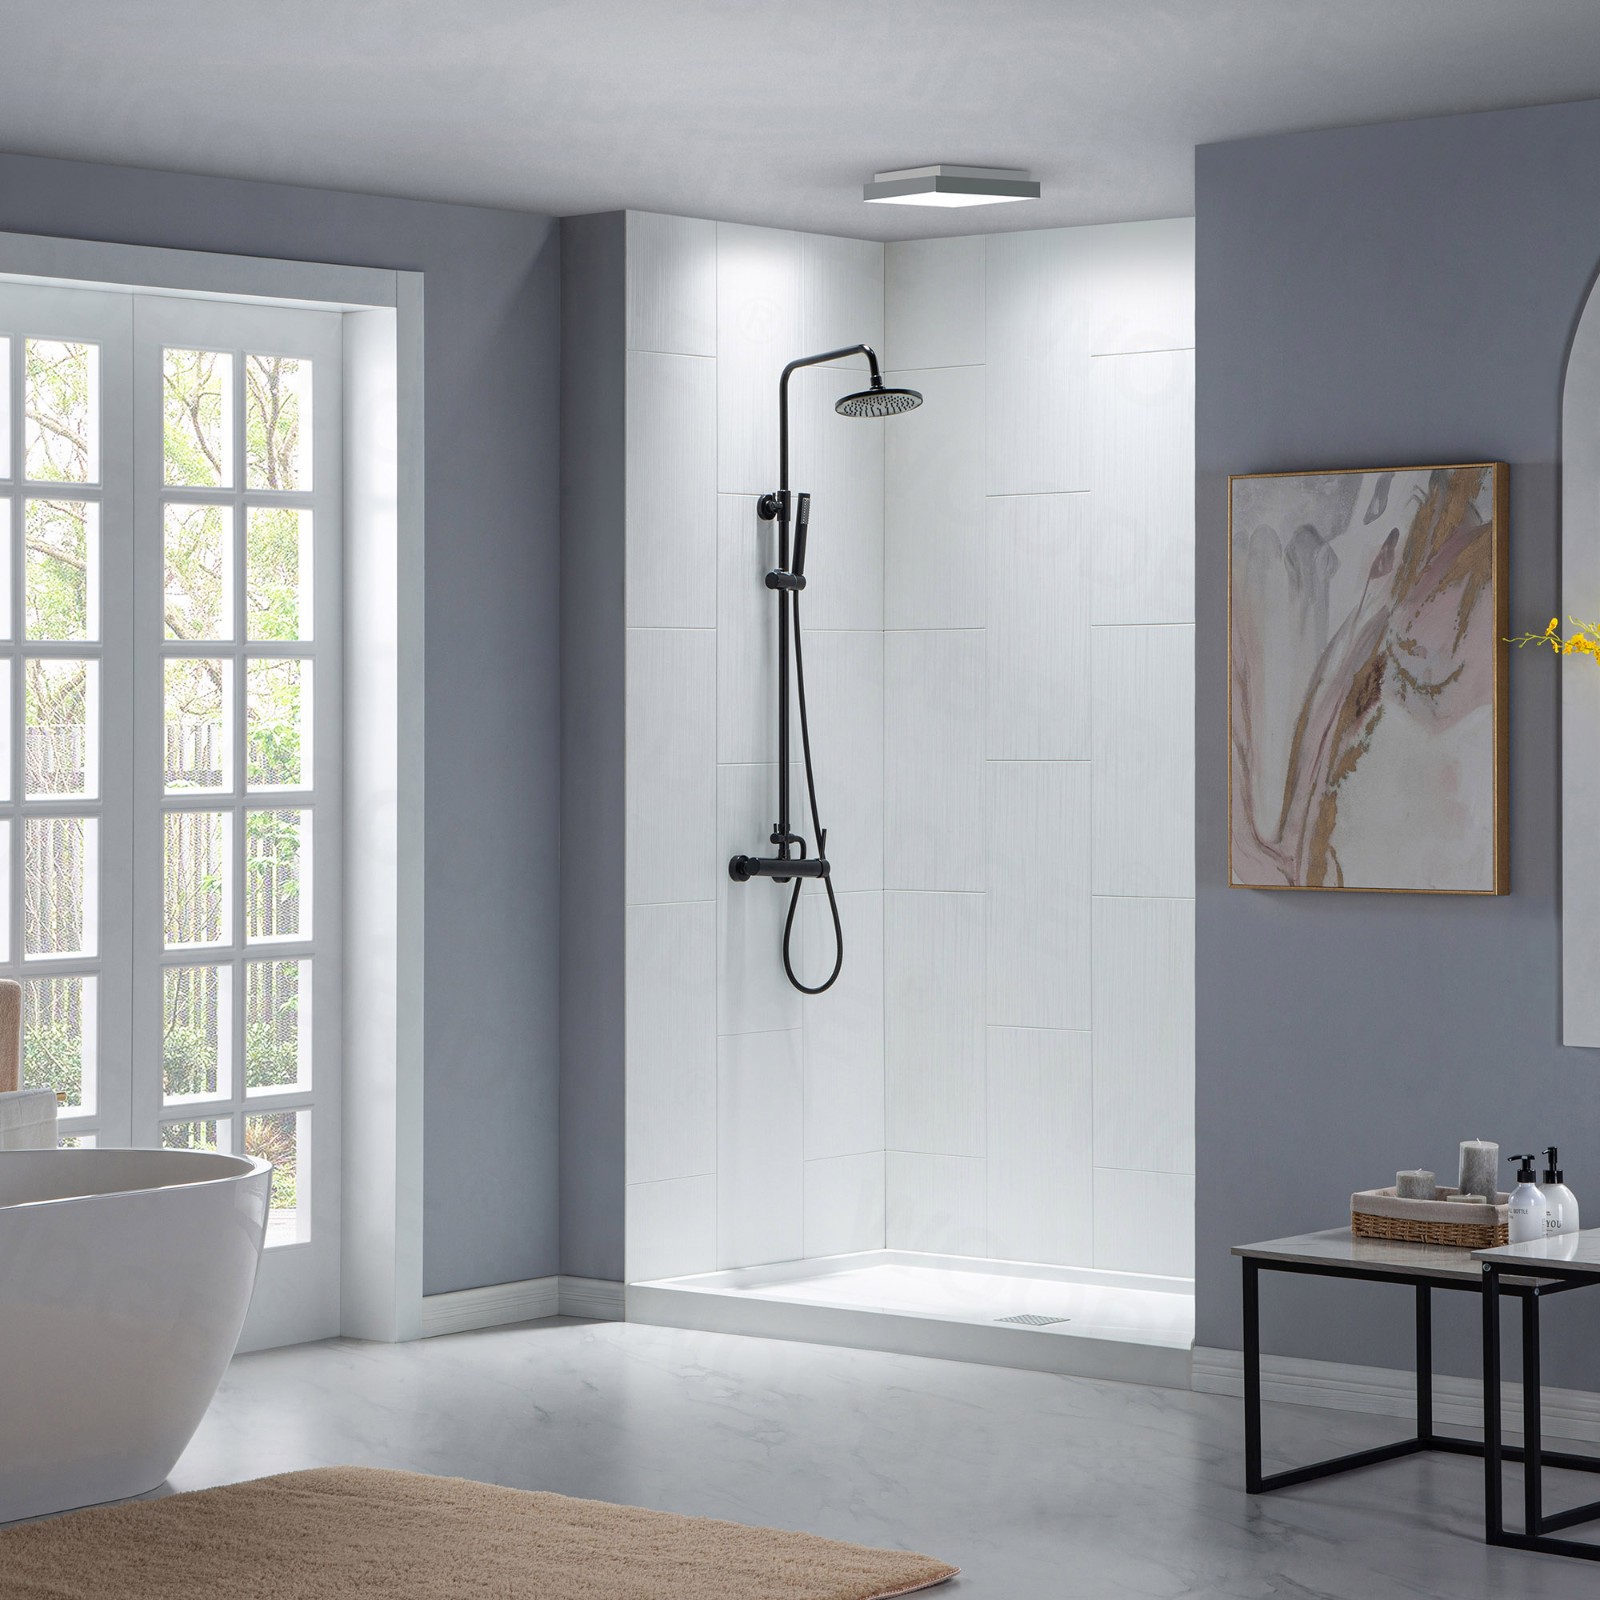  WOODBRIDGE SBR4832-1000C-ORB SolidSurface Shower Base with Recessed Trench Side Including Oil Rubbed Bronze Linear Cover, 48